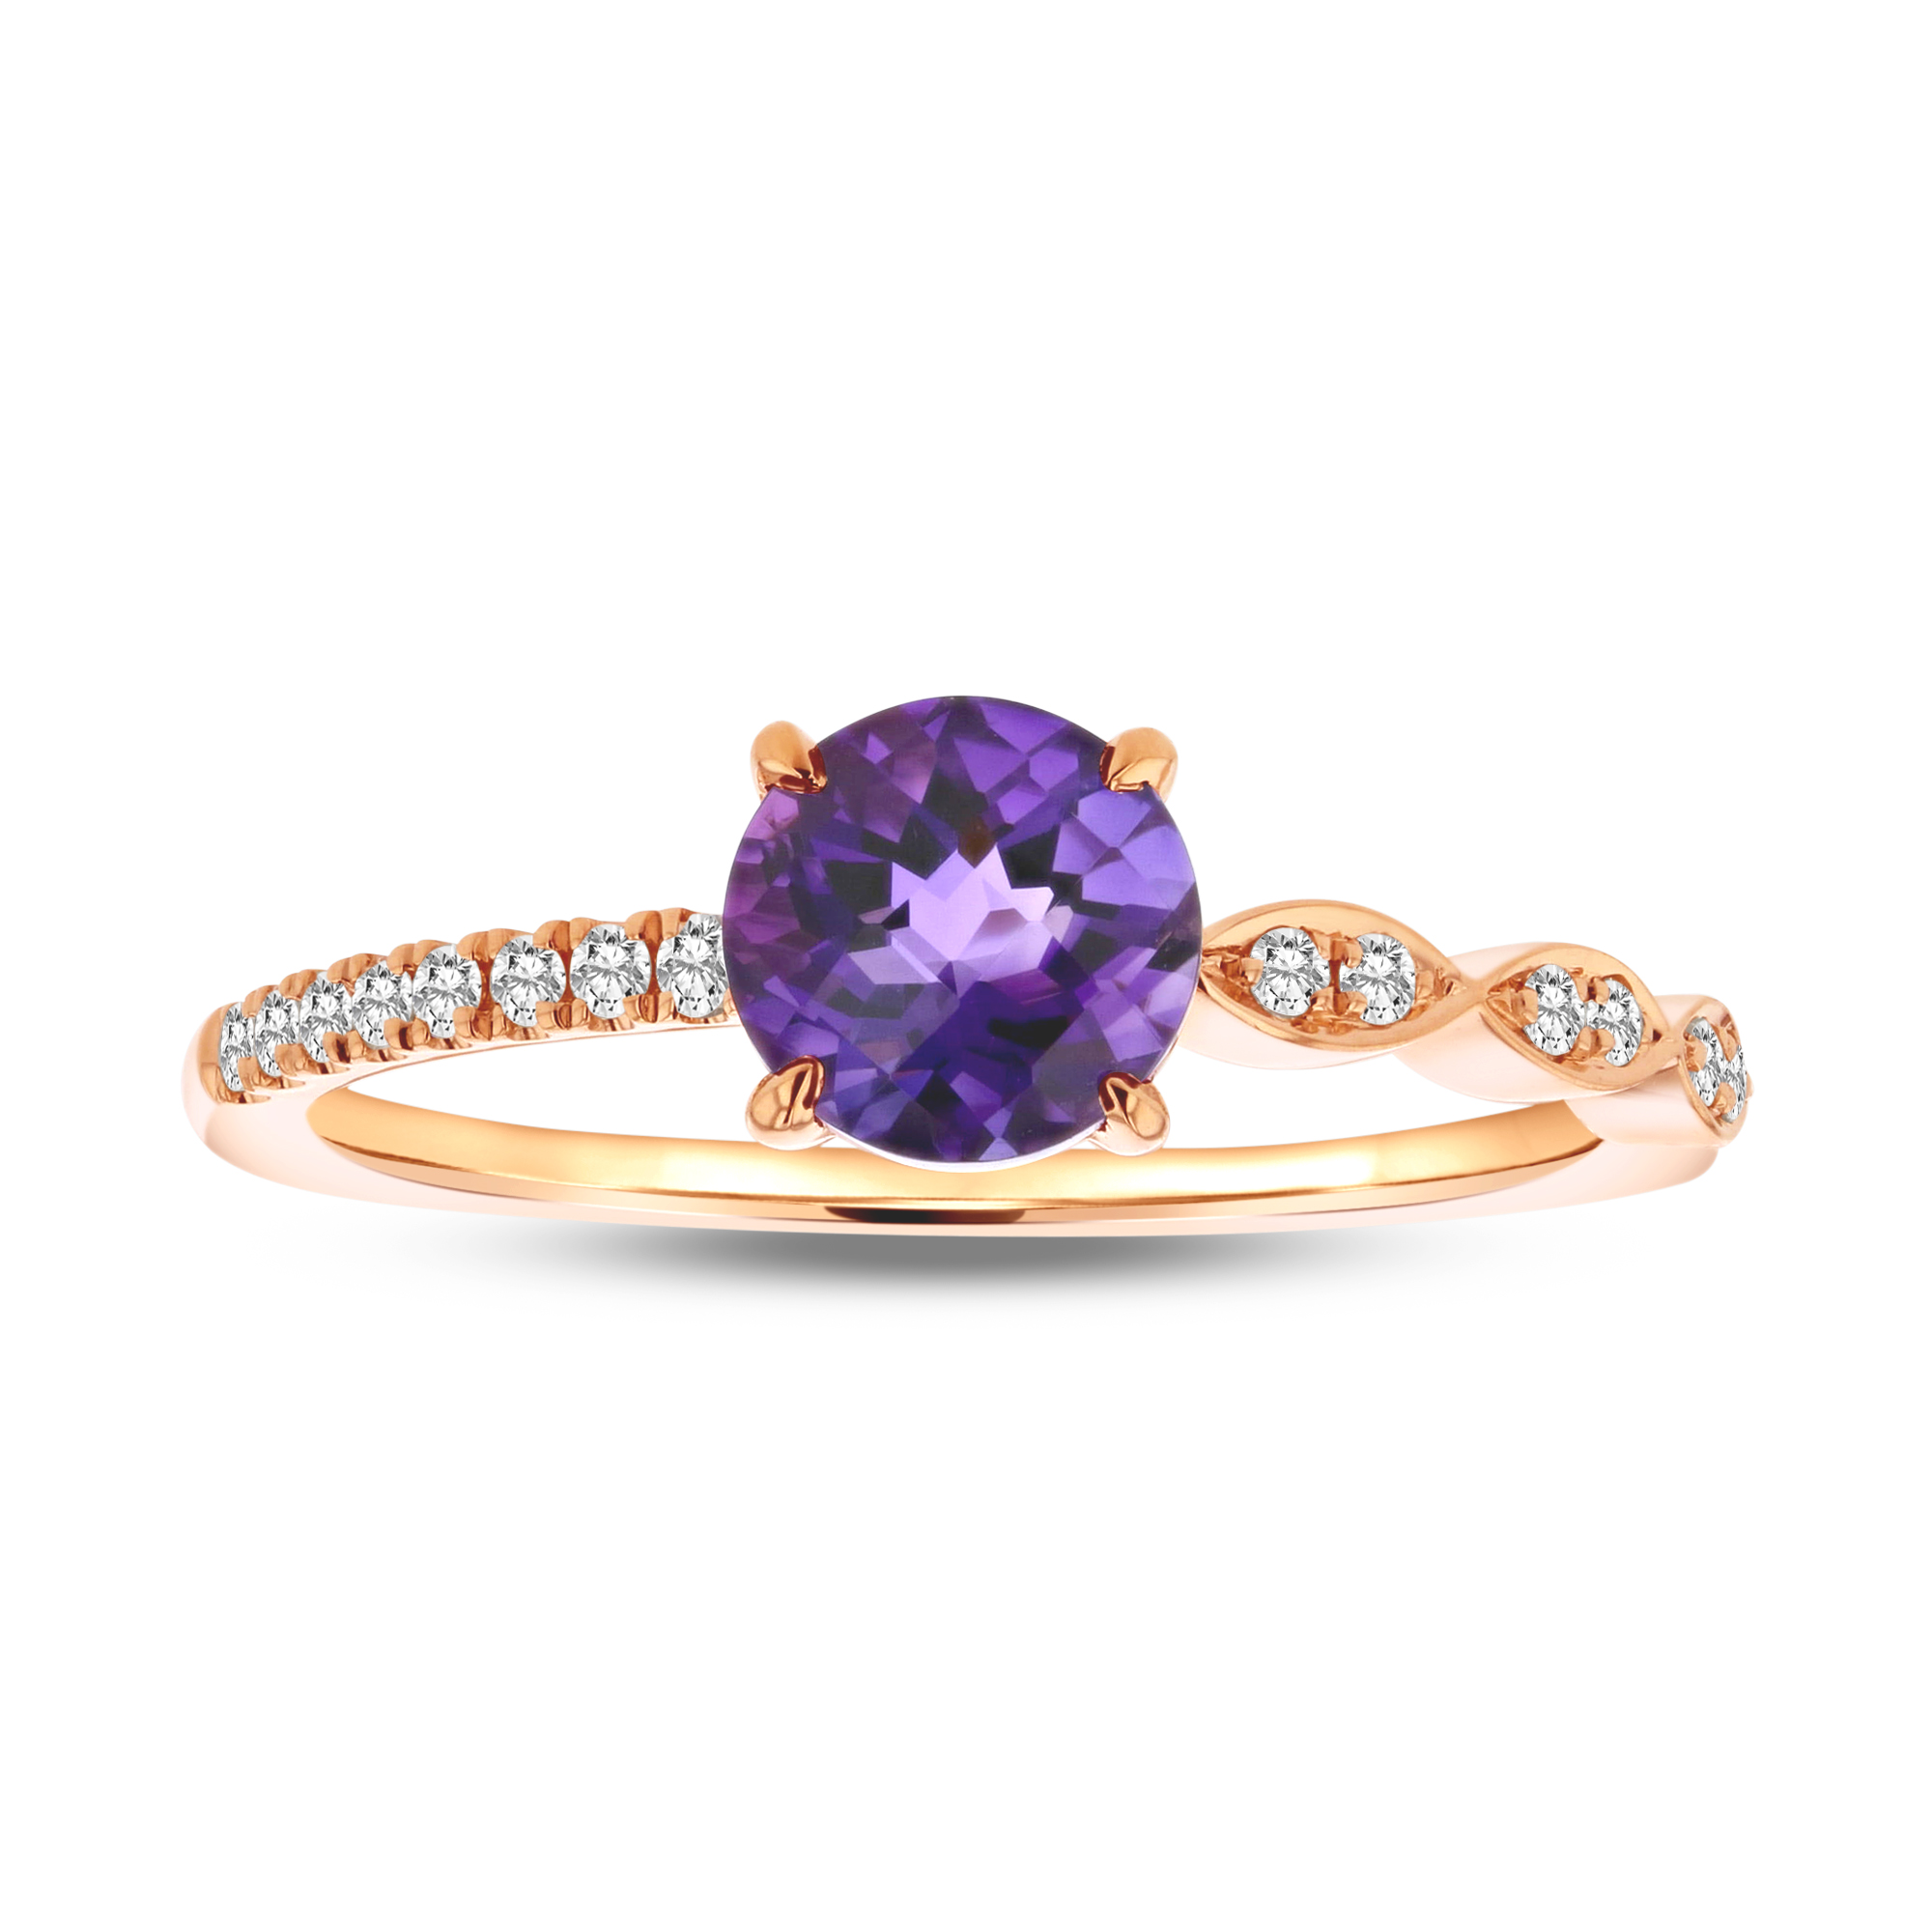 View 0.10ctw Diamond and Amethyst Ring in 14k Rose Gold